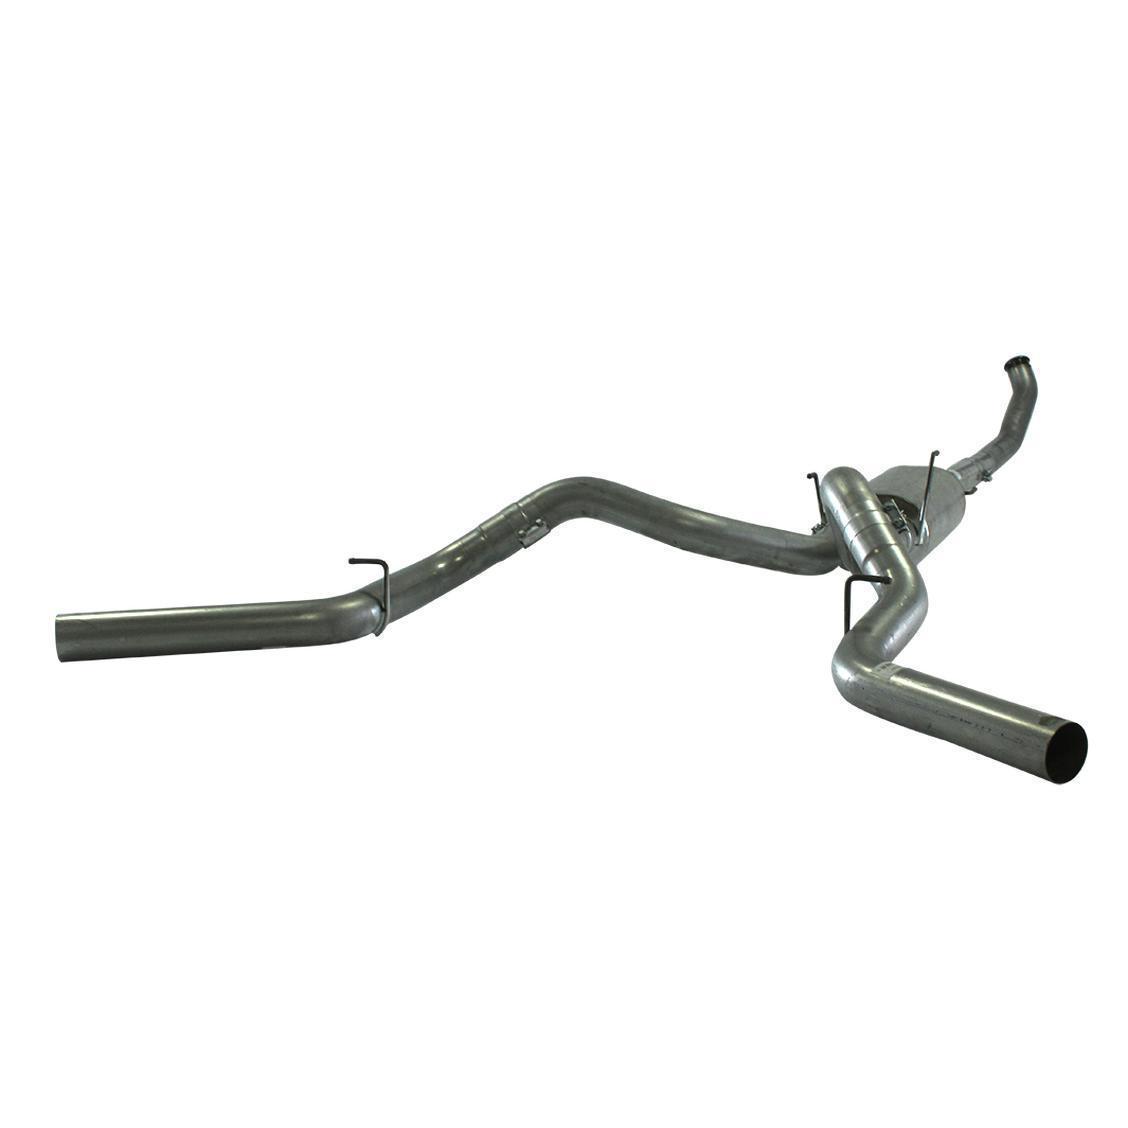 *Discontinued* 2003.5-2004 Powerstroke 4" Cat Back Dual Exhaust System w/ Muffler (FLO-706)-Cat Back Exhaust System-Flo-Pro-FLO-706-Dirty Diesel Customs